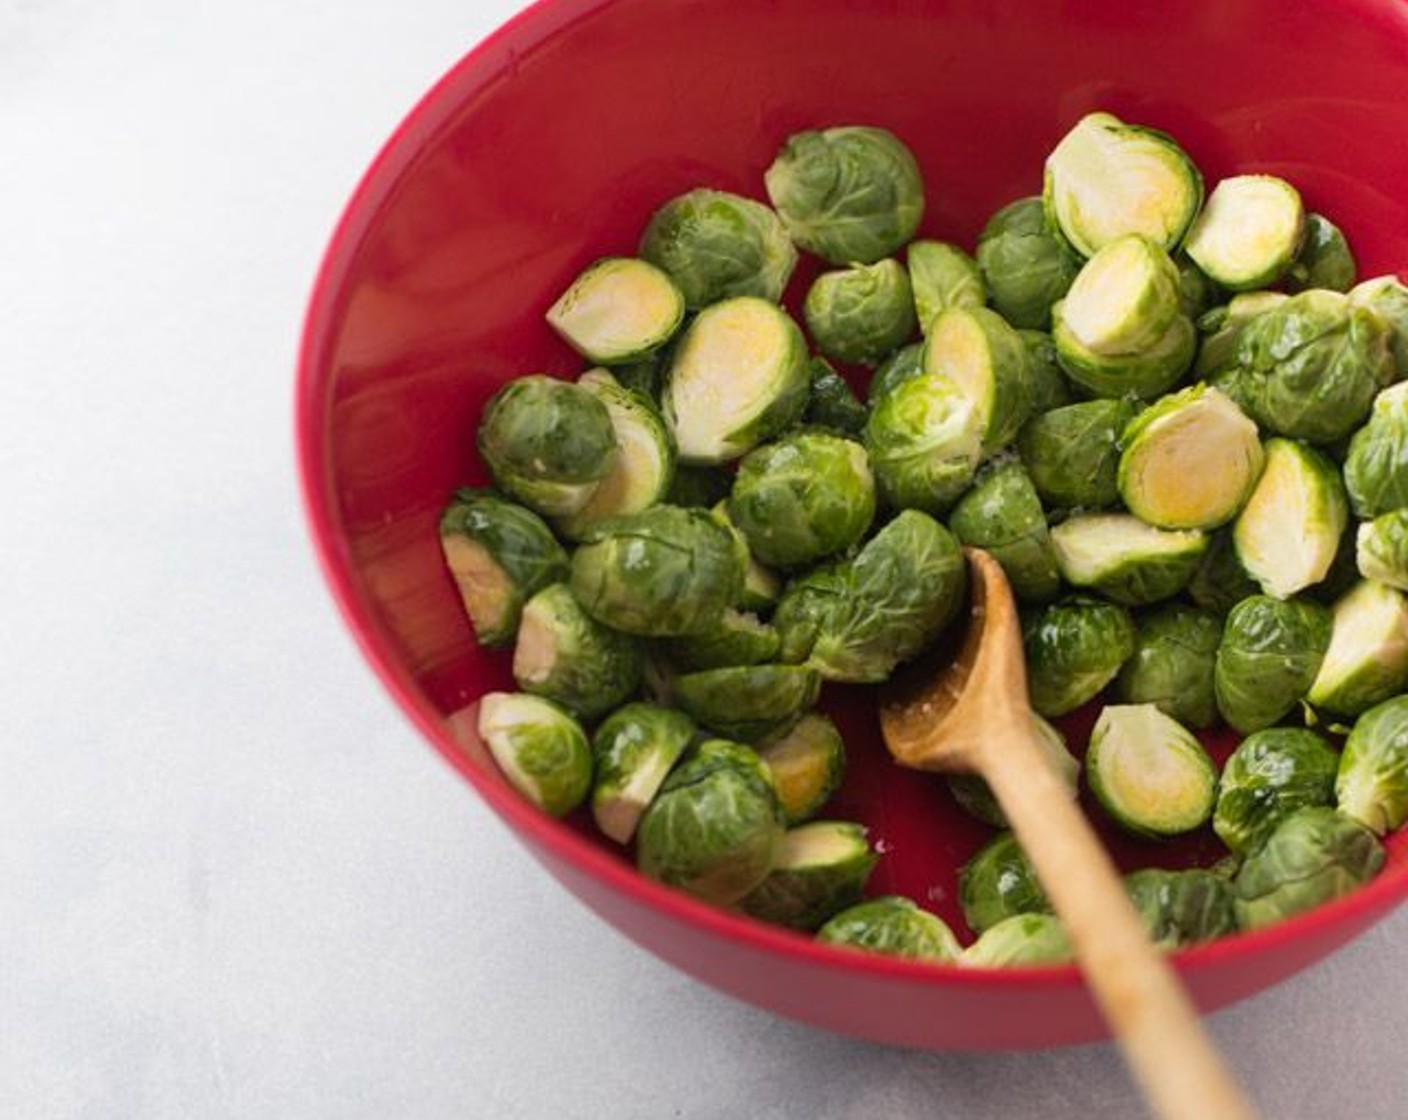 step 3 In a mixing bowl, combine the Brussels Sprouts, Extra-Virgin Olive Oil (2 Tbsp) and Sea Salt (1/4 tsp). Toss until well coated.